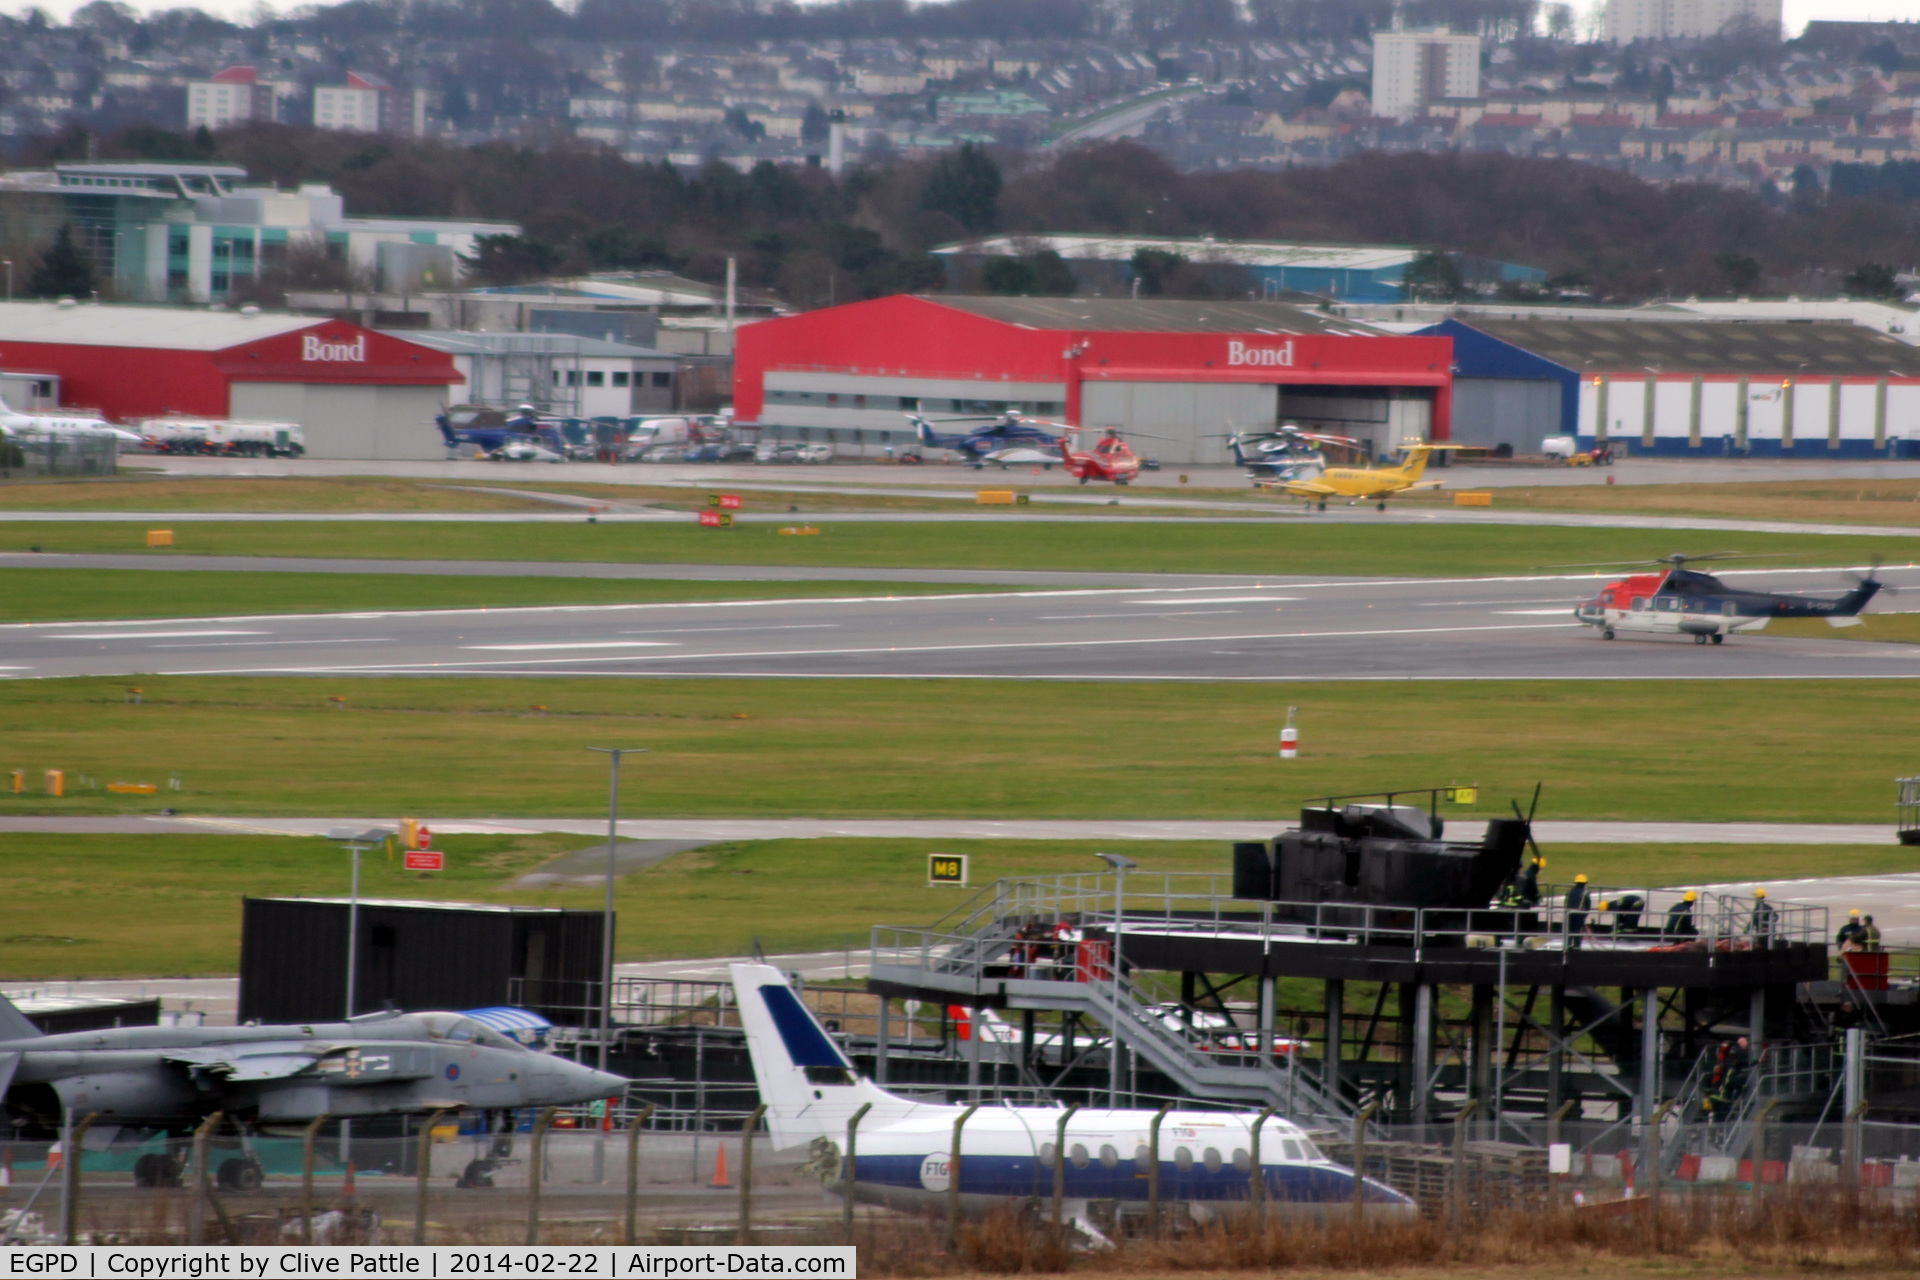 Aberdeen Airport, Aberdeen, Scotland United Kingdom (EGPD) - Airport view - Fire training area in the foreground with BAe Jetstream T.2 and Sepecat Jaguar on show.